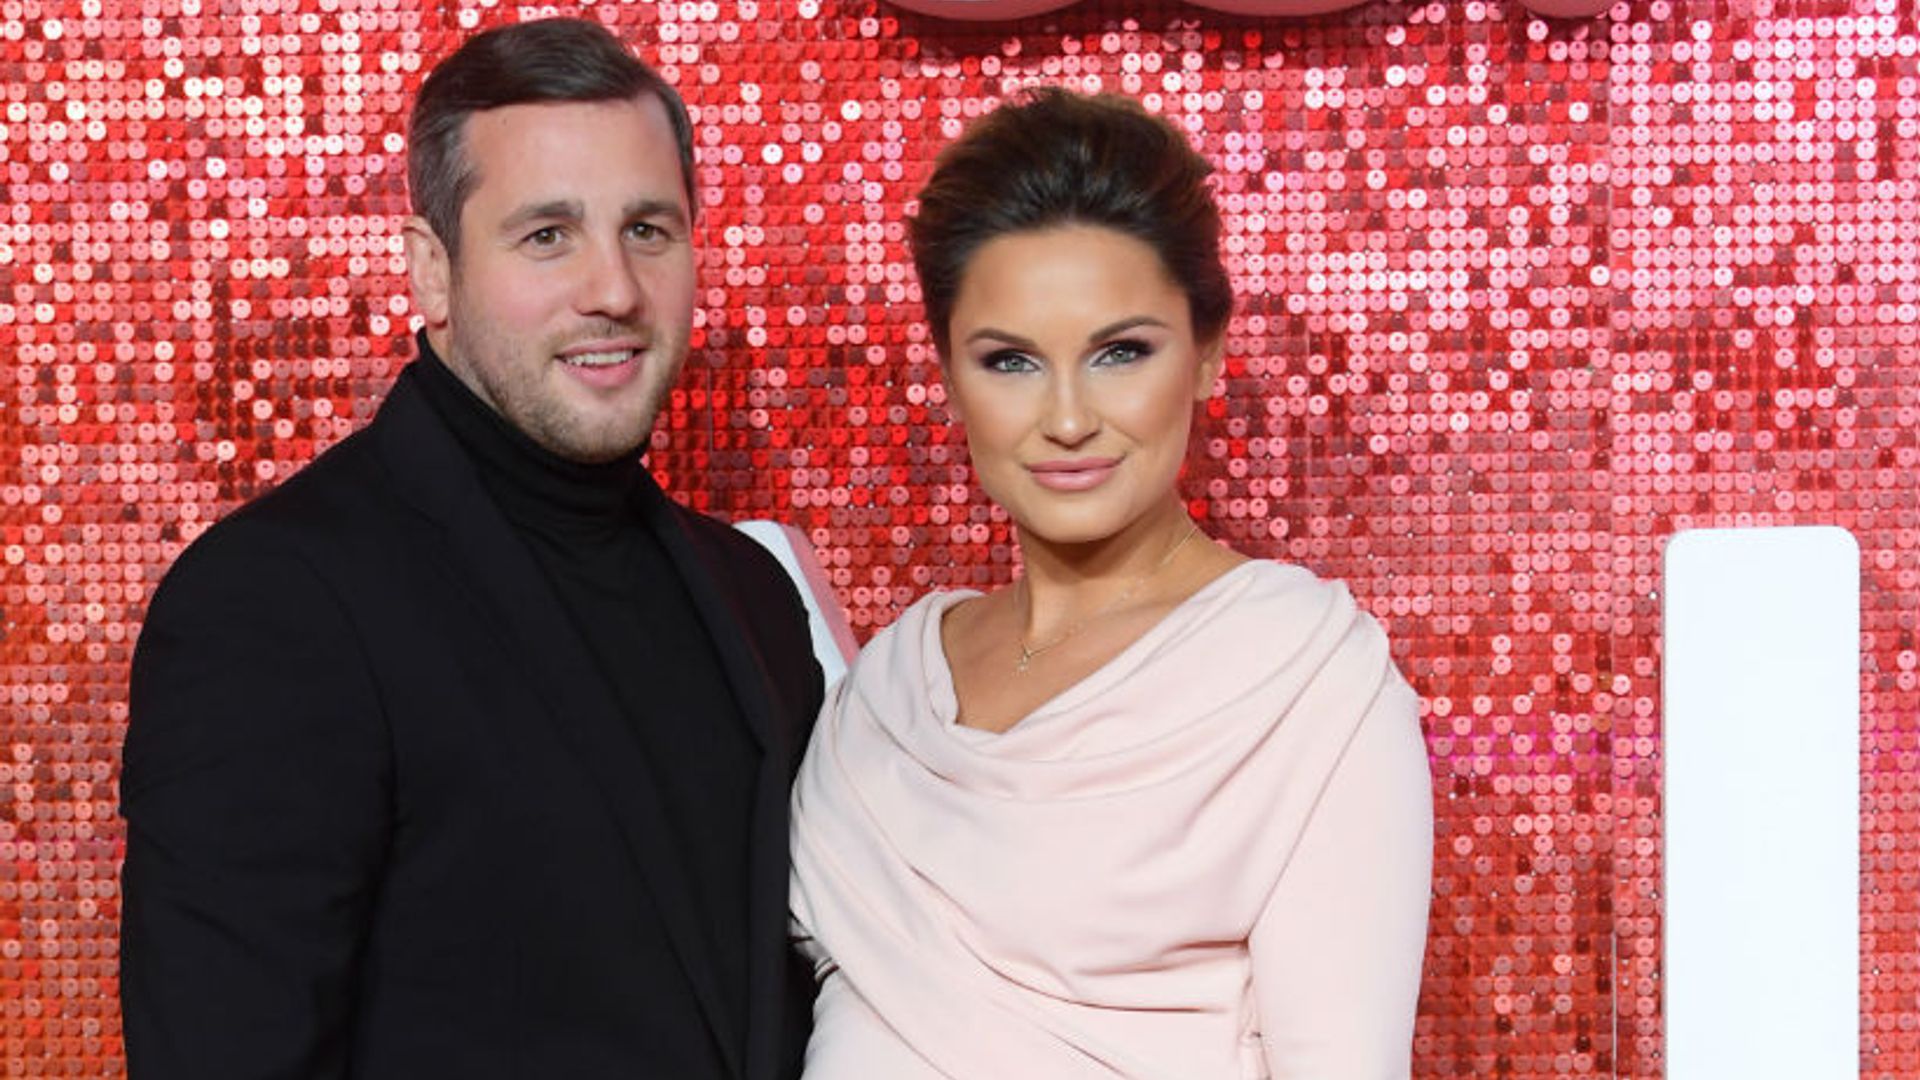 Sam Faiers posts gorgeous snap of baby daughter